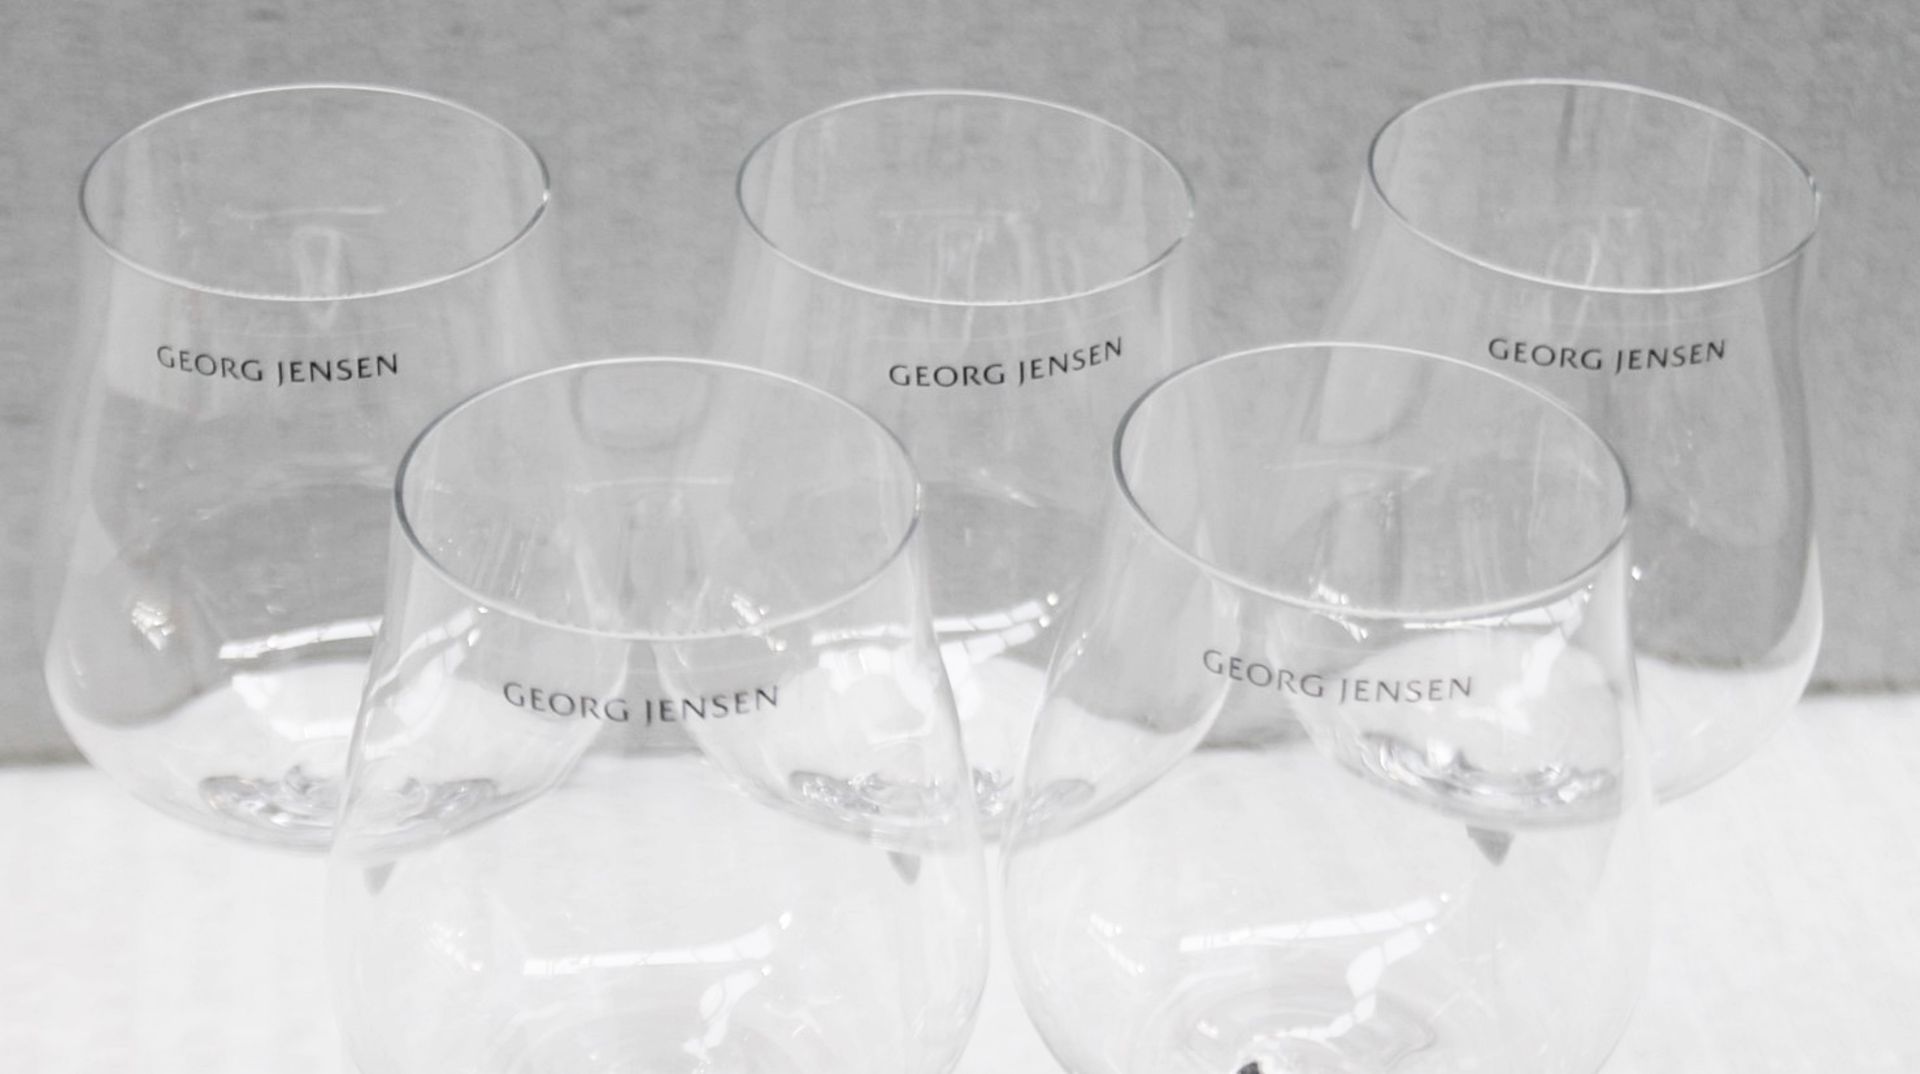 5 x GEORG JENSEN 'Sky' Crystal White Wine Glass - Ref: 6864831/HAS2157/WH2-C5/02-23-1 - CL987 - - Image 5 of 8